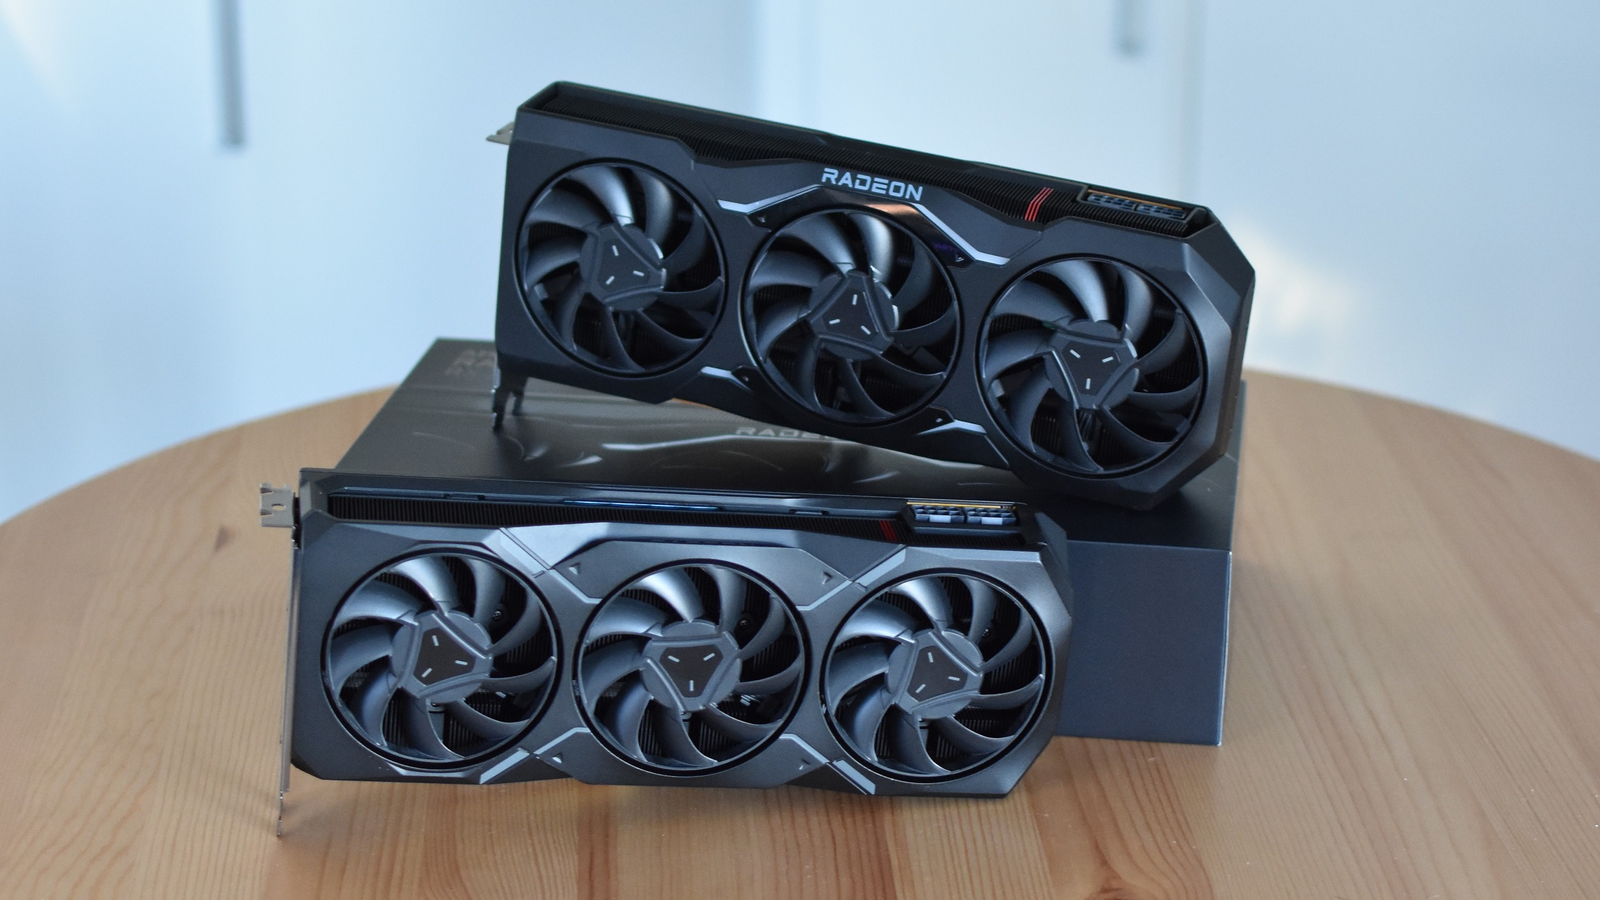 AMD Radeon RX 7900 XT and Radeon RX 7900 XTX review: rise of the